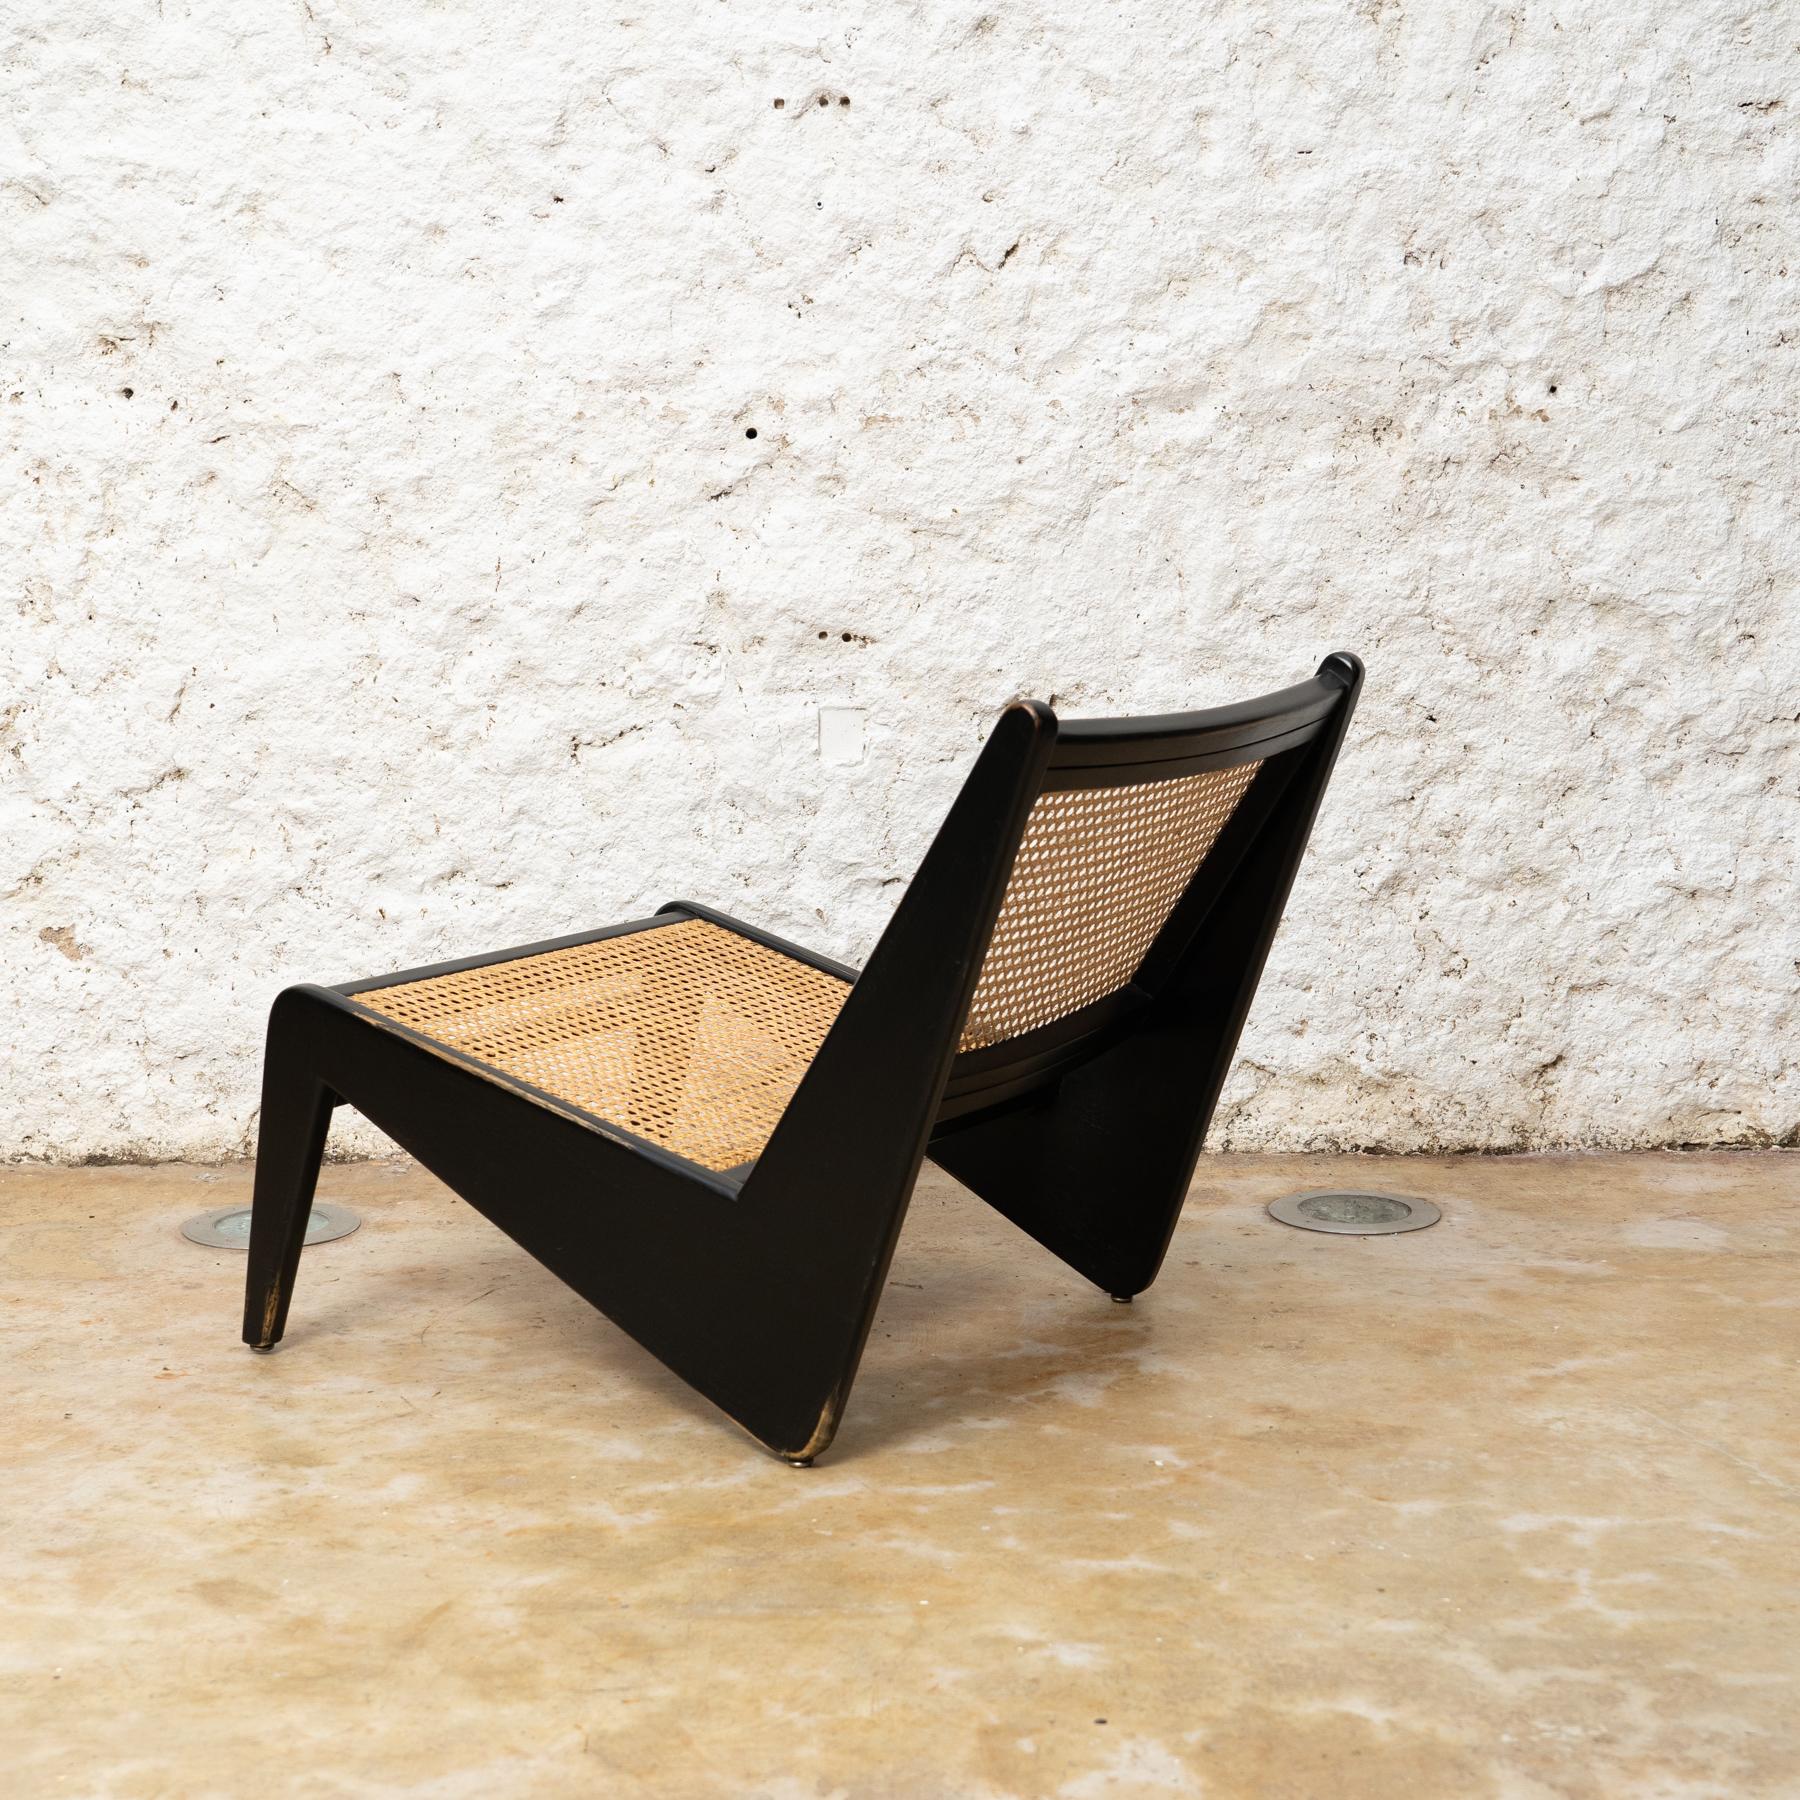 Late 20th Century Black Wood Chair after Pierre Jeanneret, circa 1990